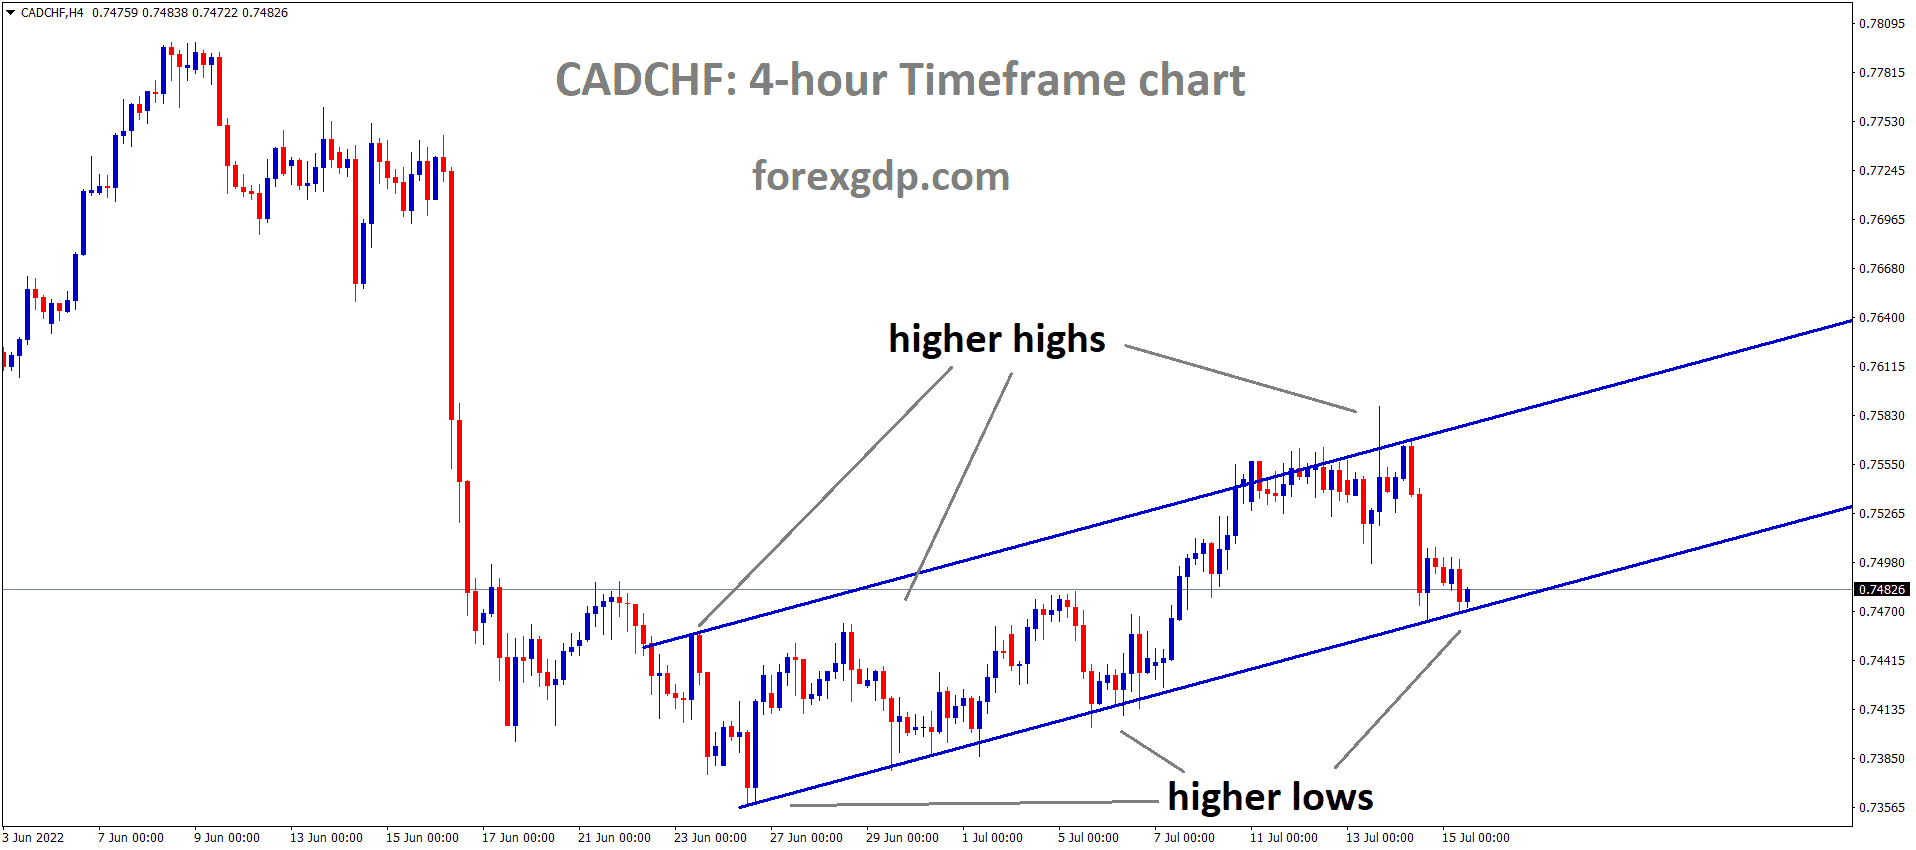 CADCHF is moving in an Ascending channel and the market has reached the higher low area of the channel